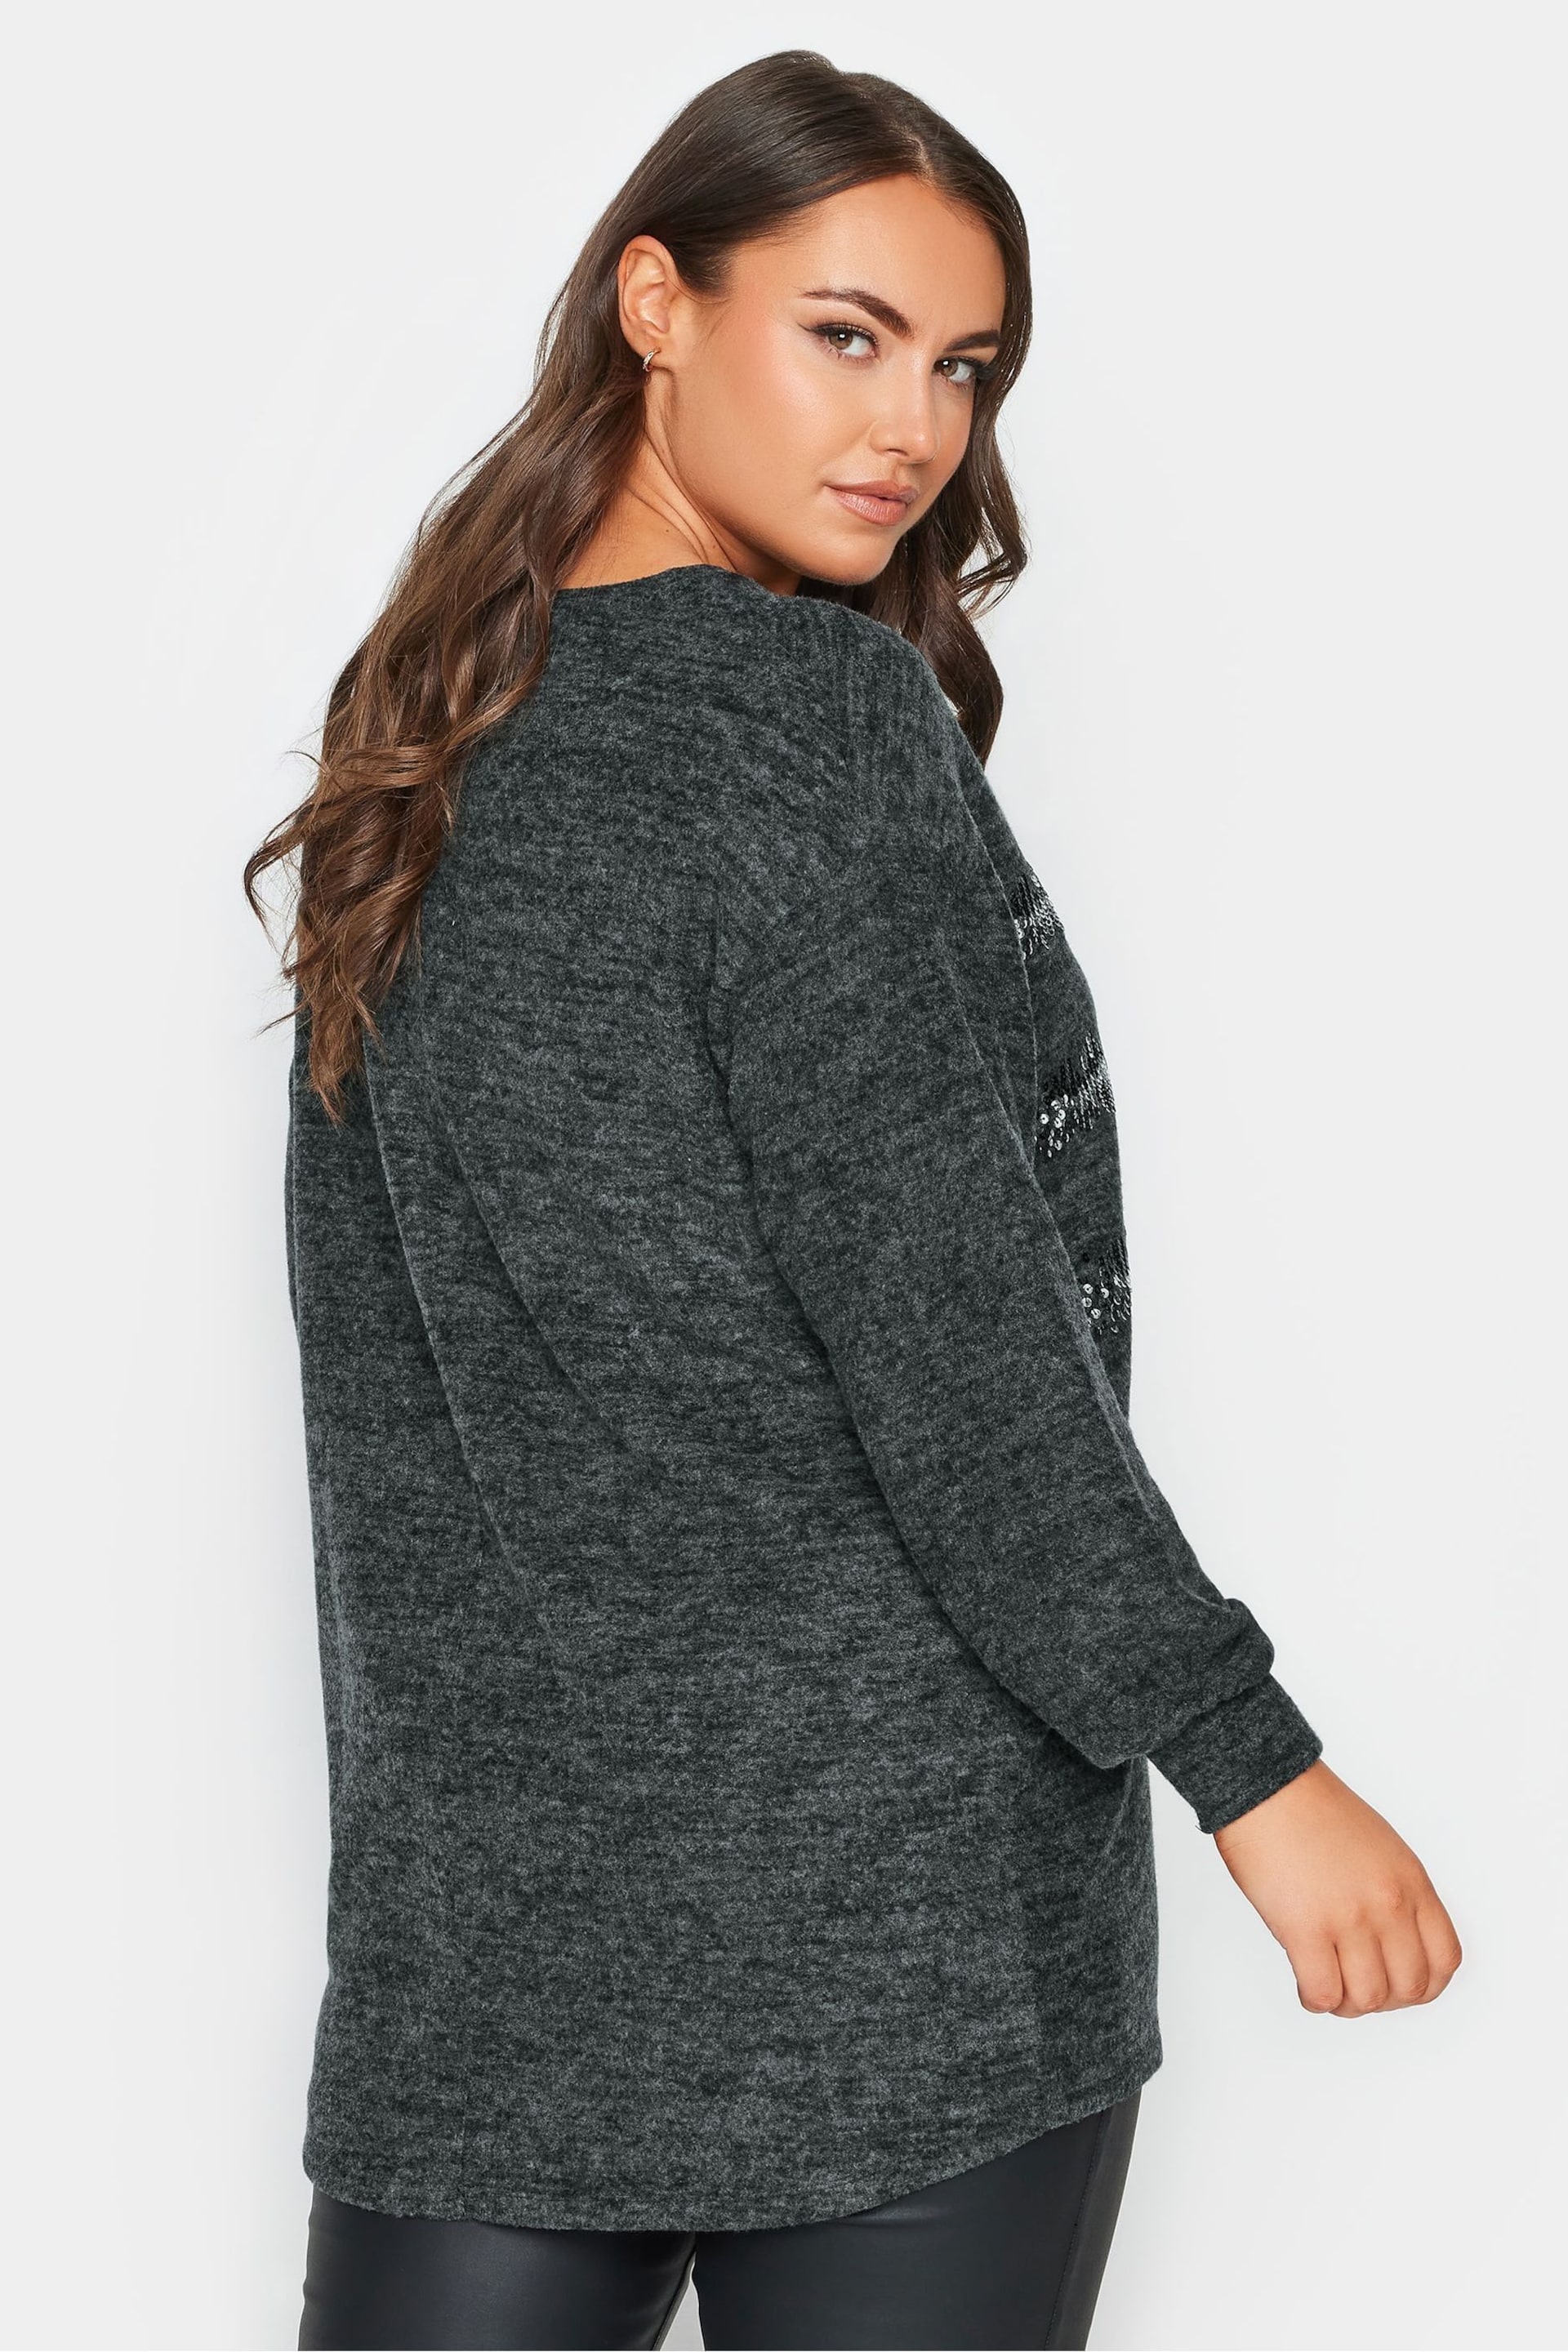 Yours Curve Grey Sequin Jumper - Image 2 of 4